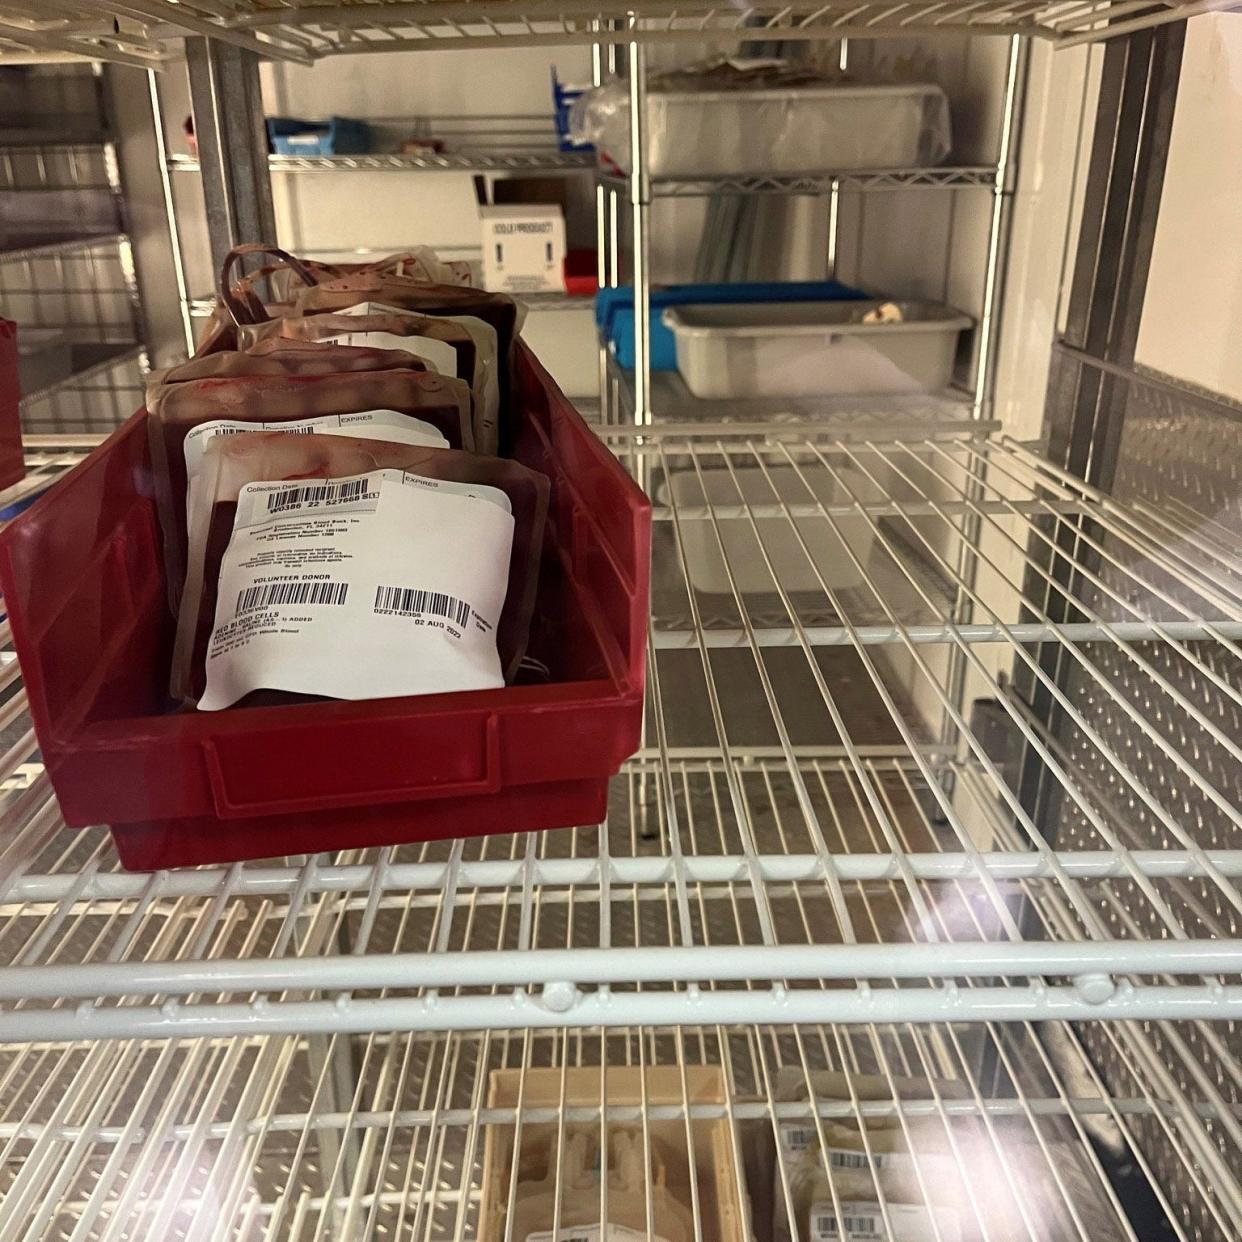 SunCoast Blood Centers posted this photo of a few pints of blood in refrigerated storage to social media on Wednesday. The nonprofit is facing a seasonal slowdown in the number of donors that has been exacerbated by the COVID-19 pandemic.